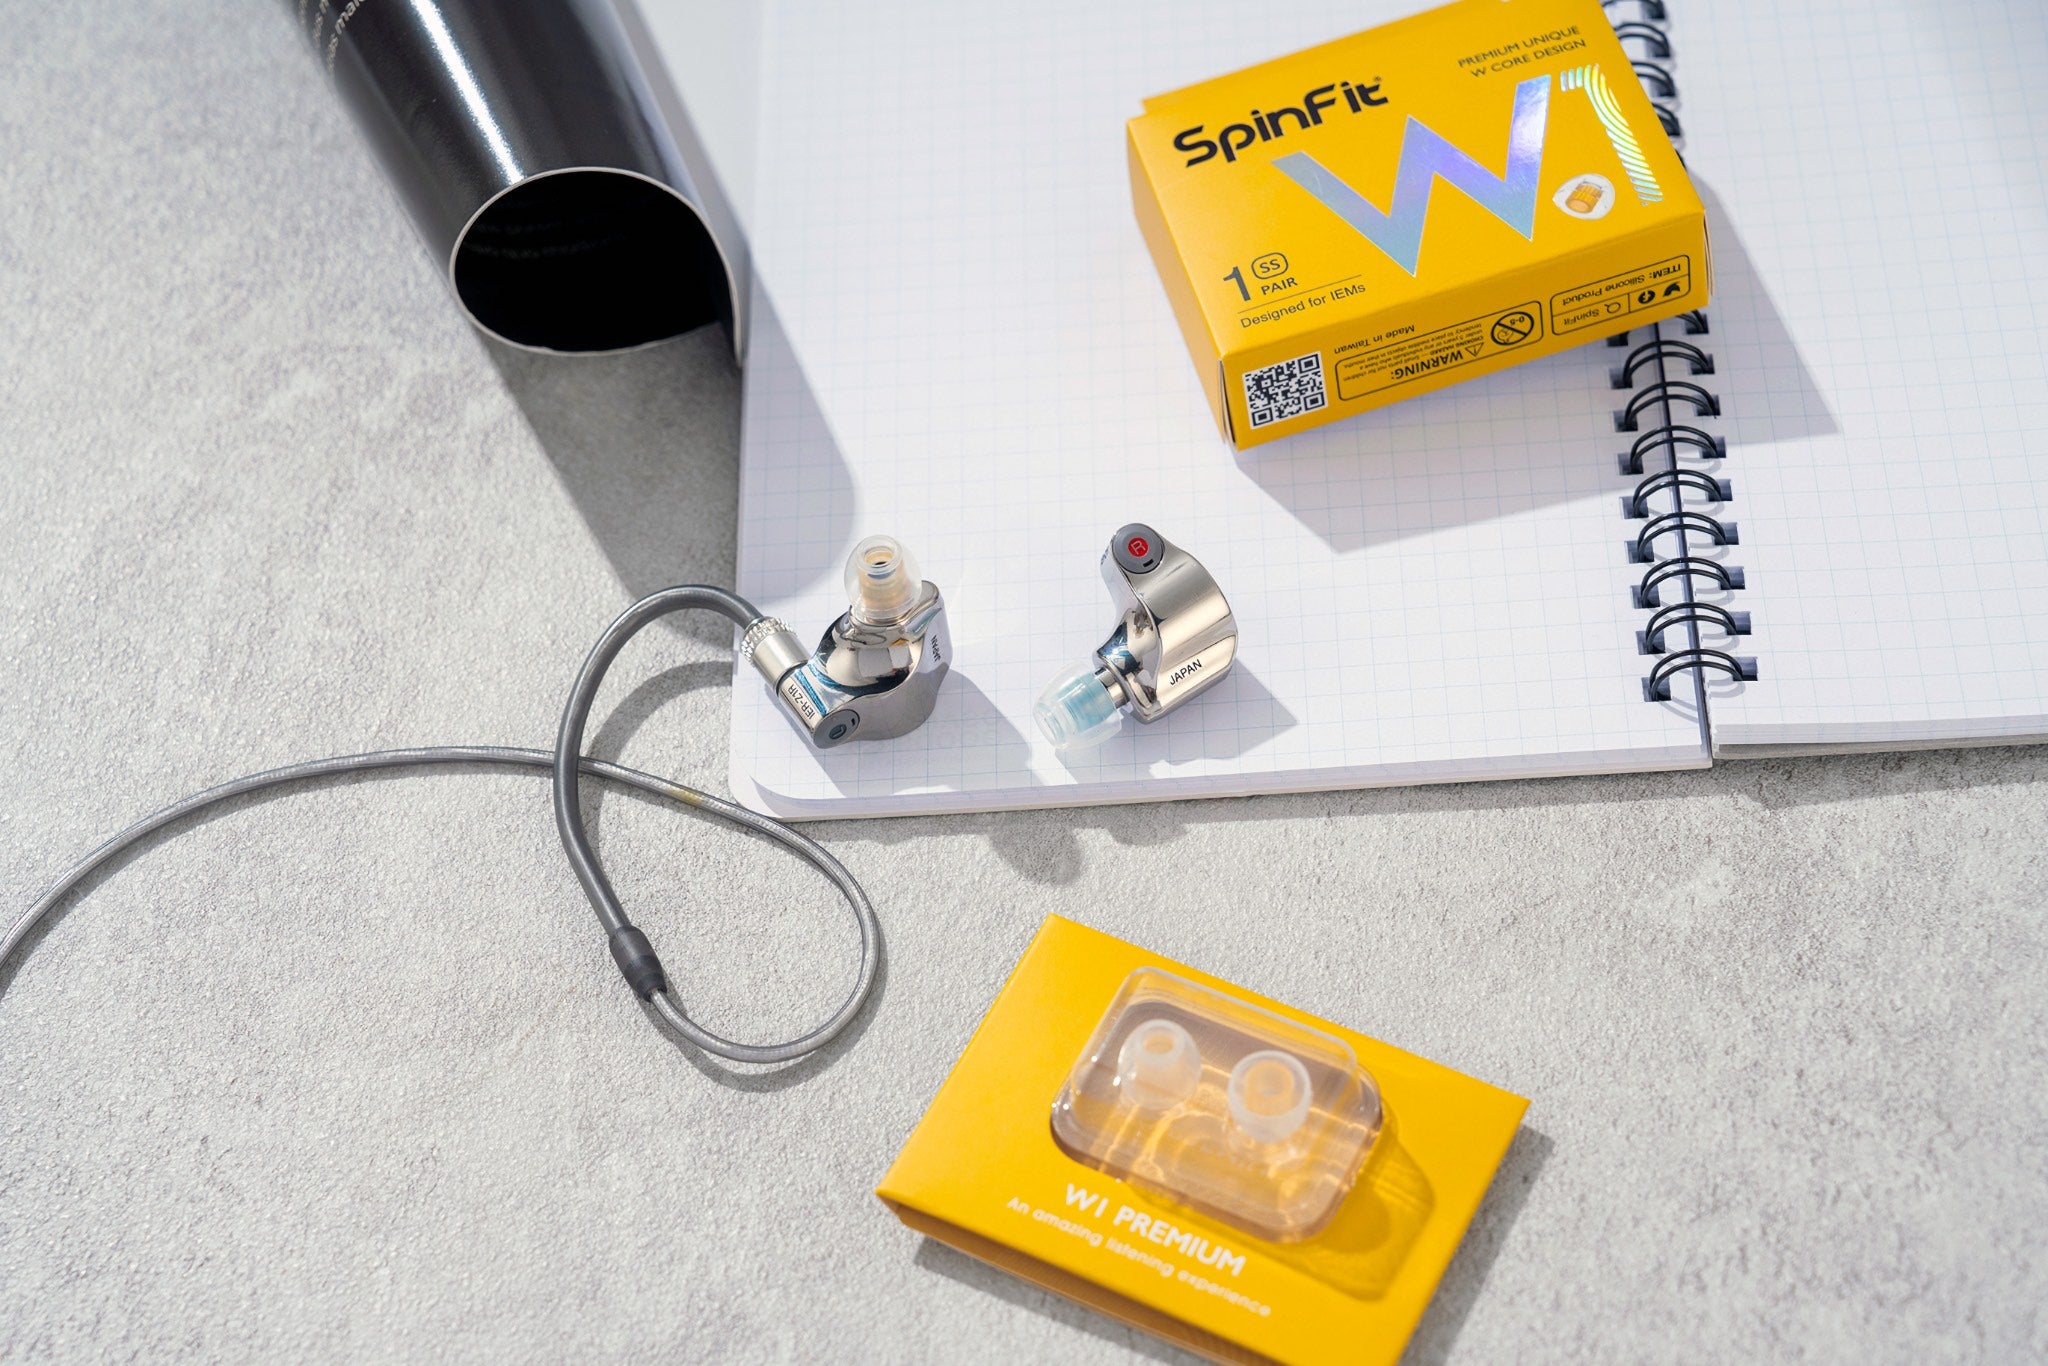 SpinFit W1 SS retail box with insert and loose units attached to earphones